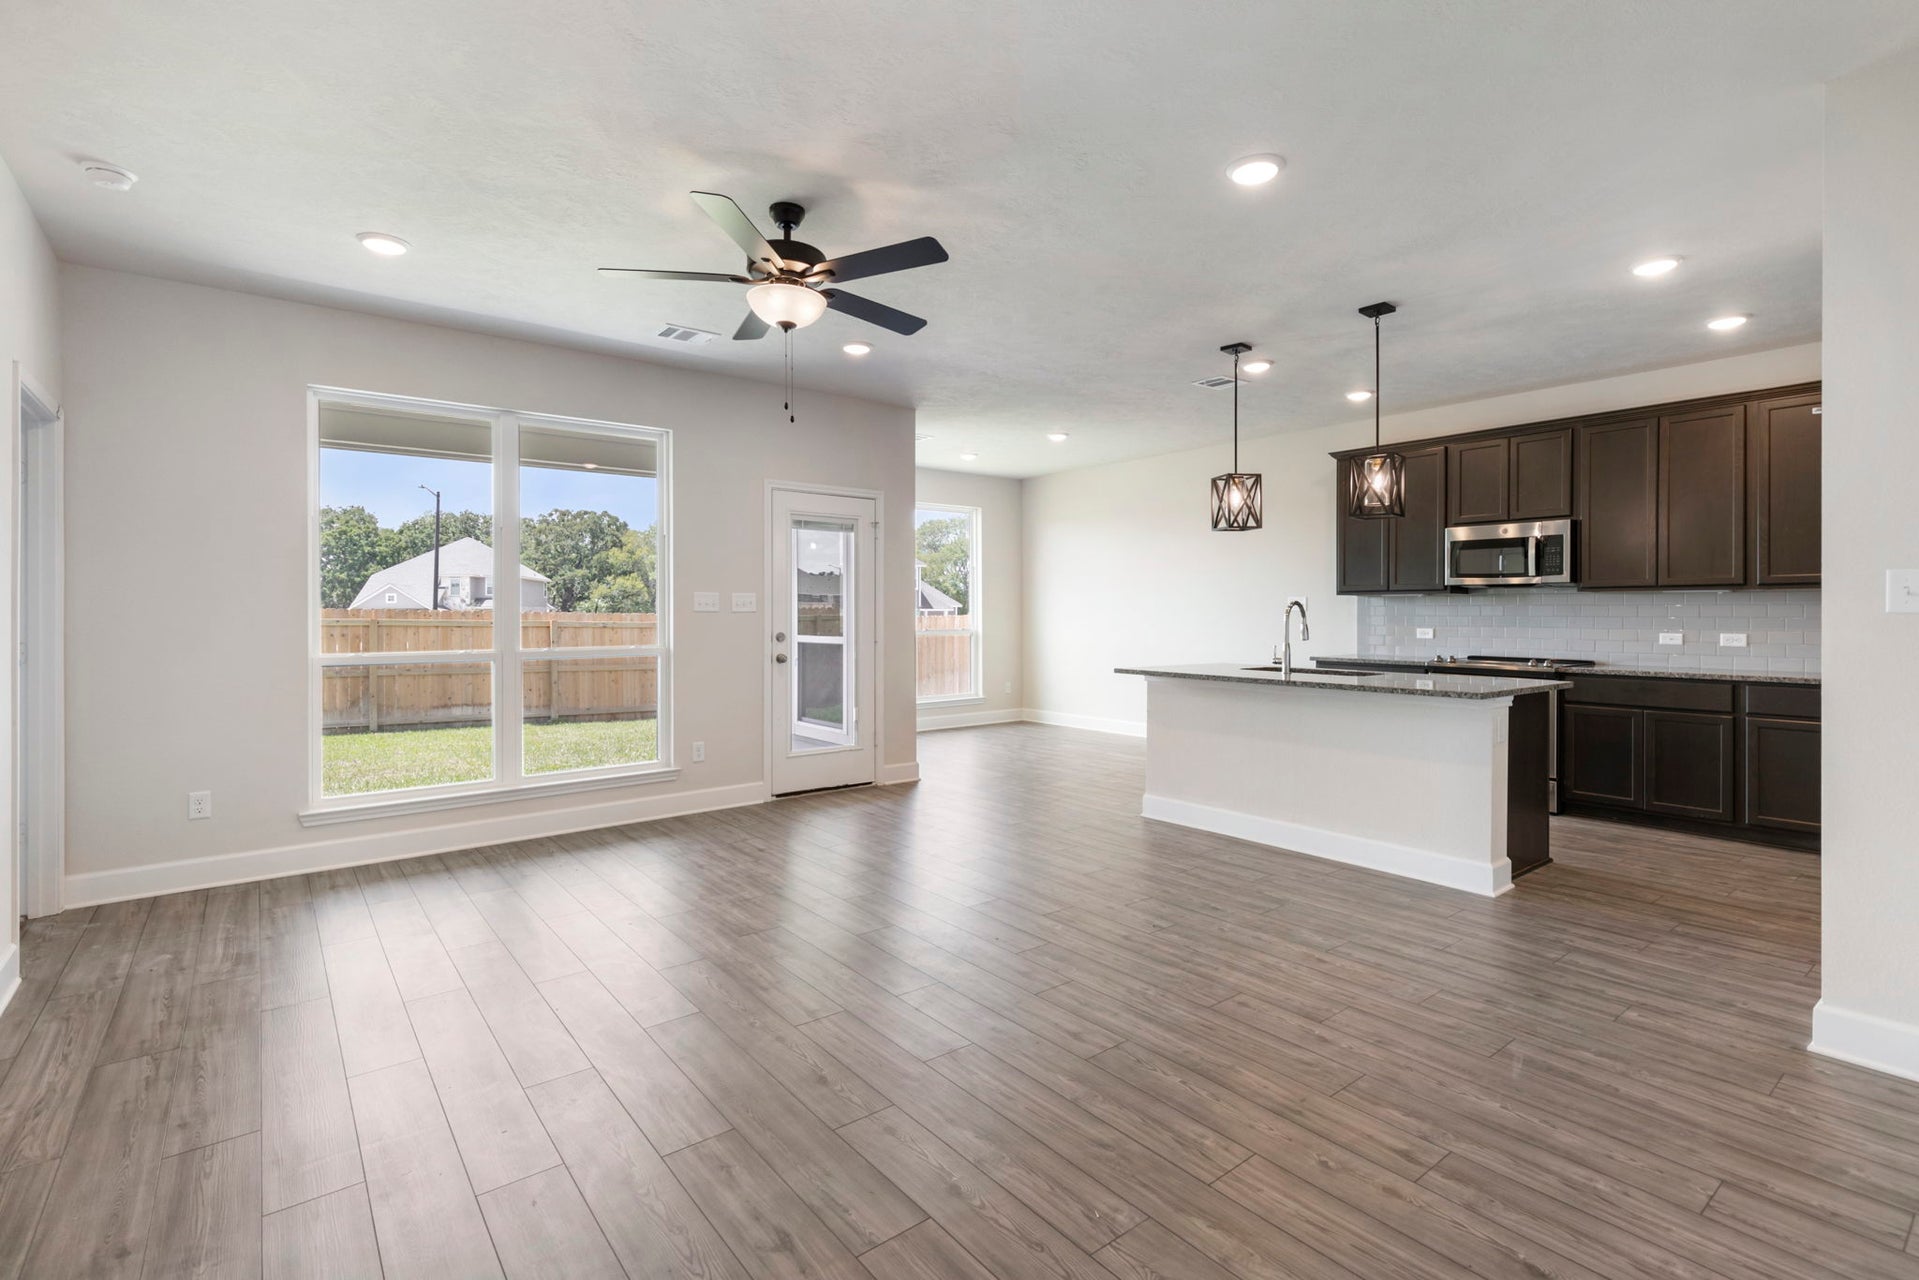 4br New Home in Killeen, TX